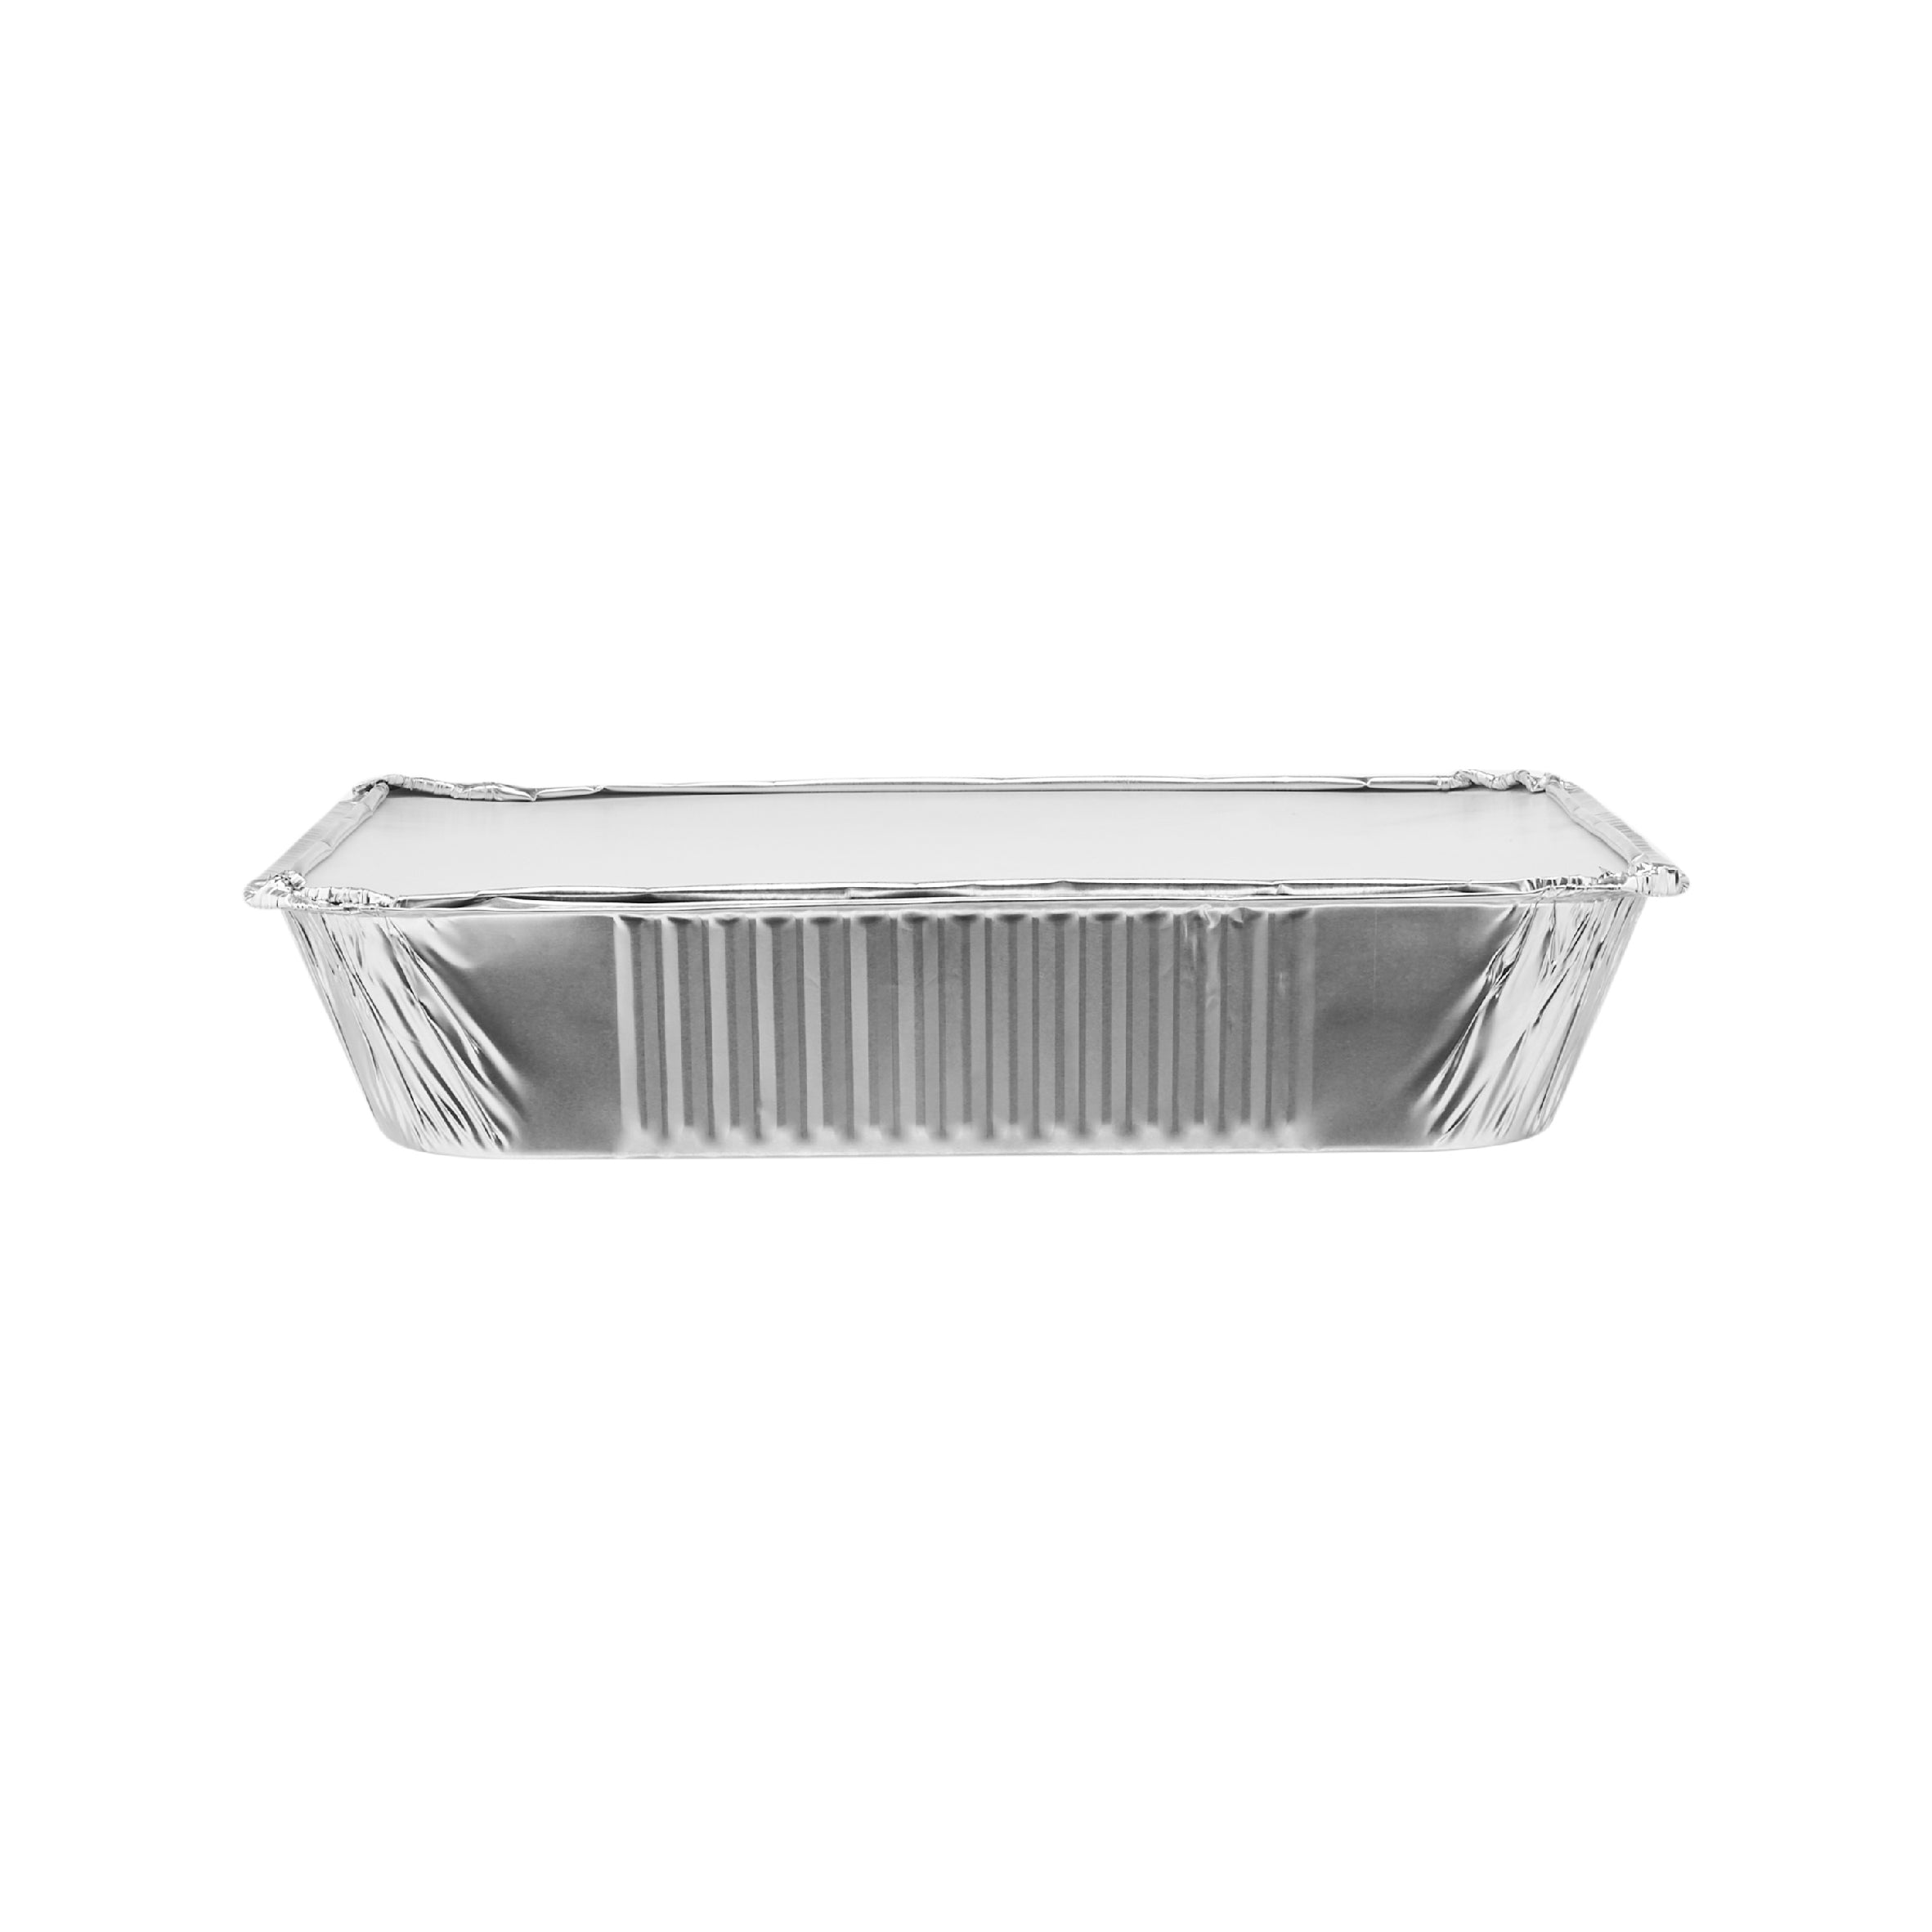 73365 Aluminum take-out container with lid - Hotpack Global